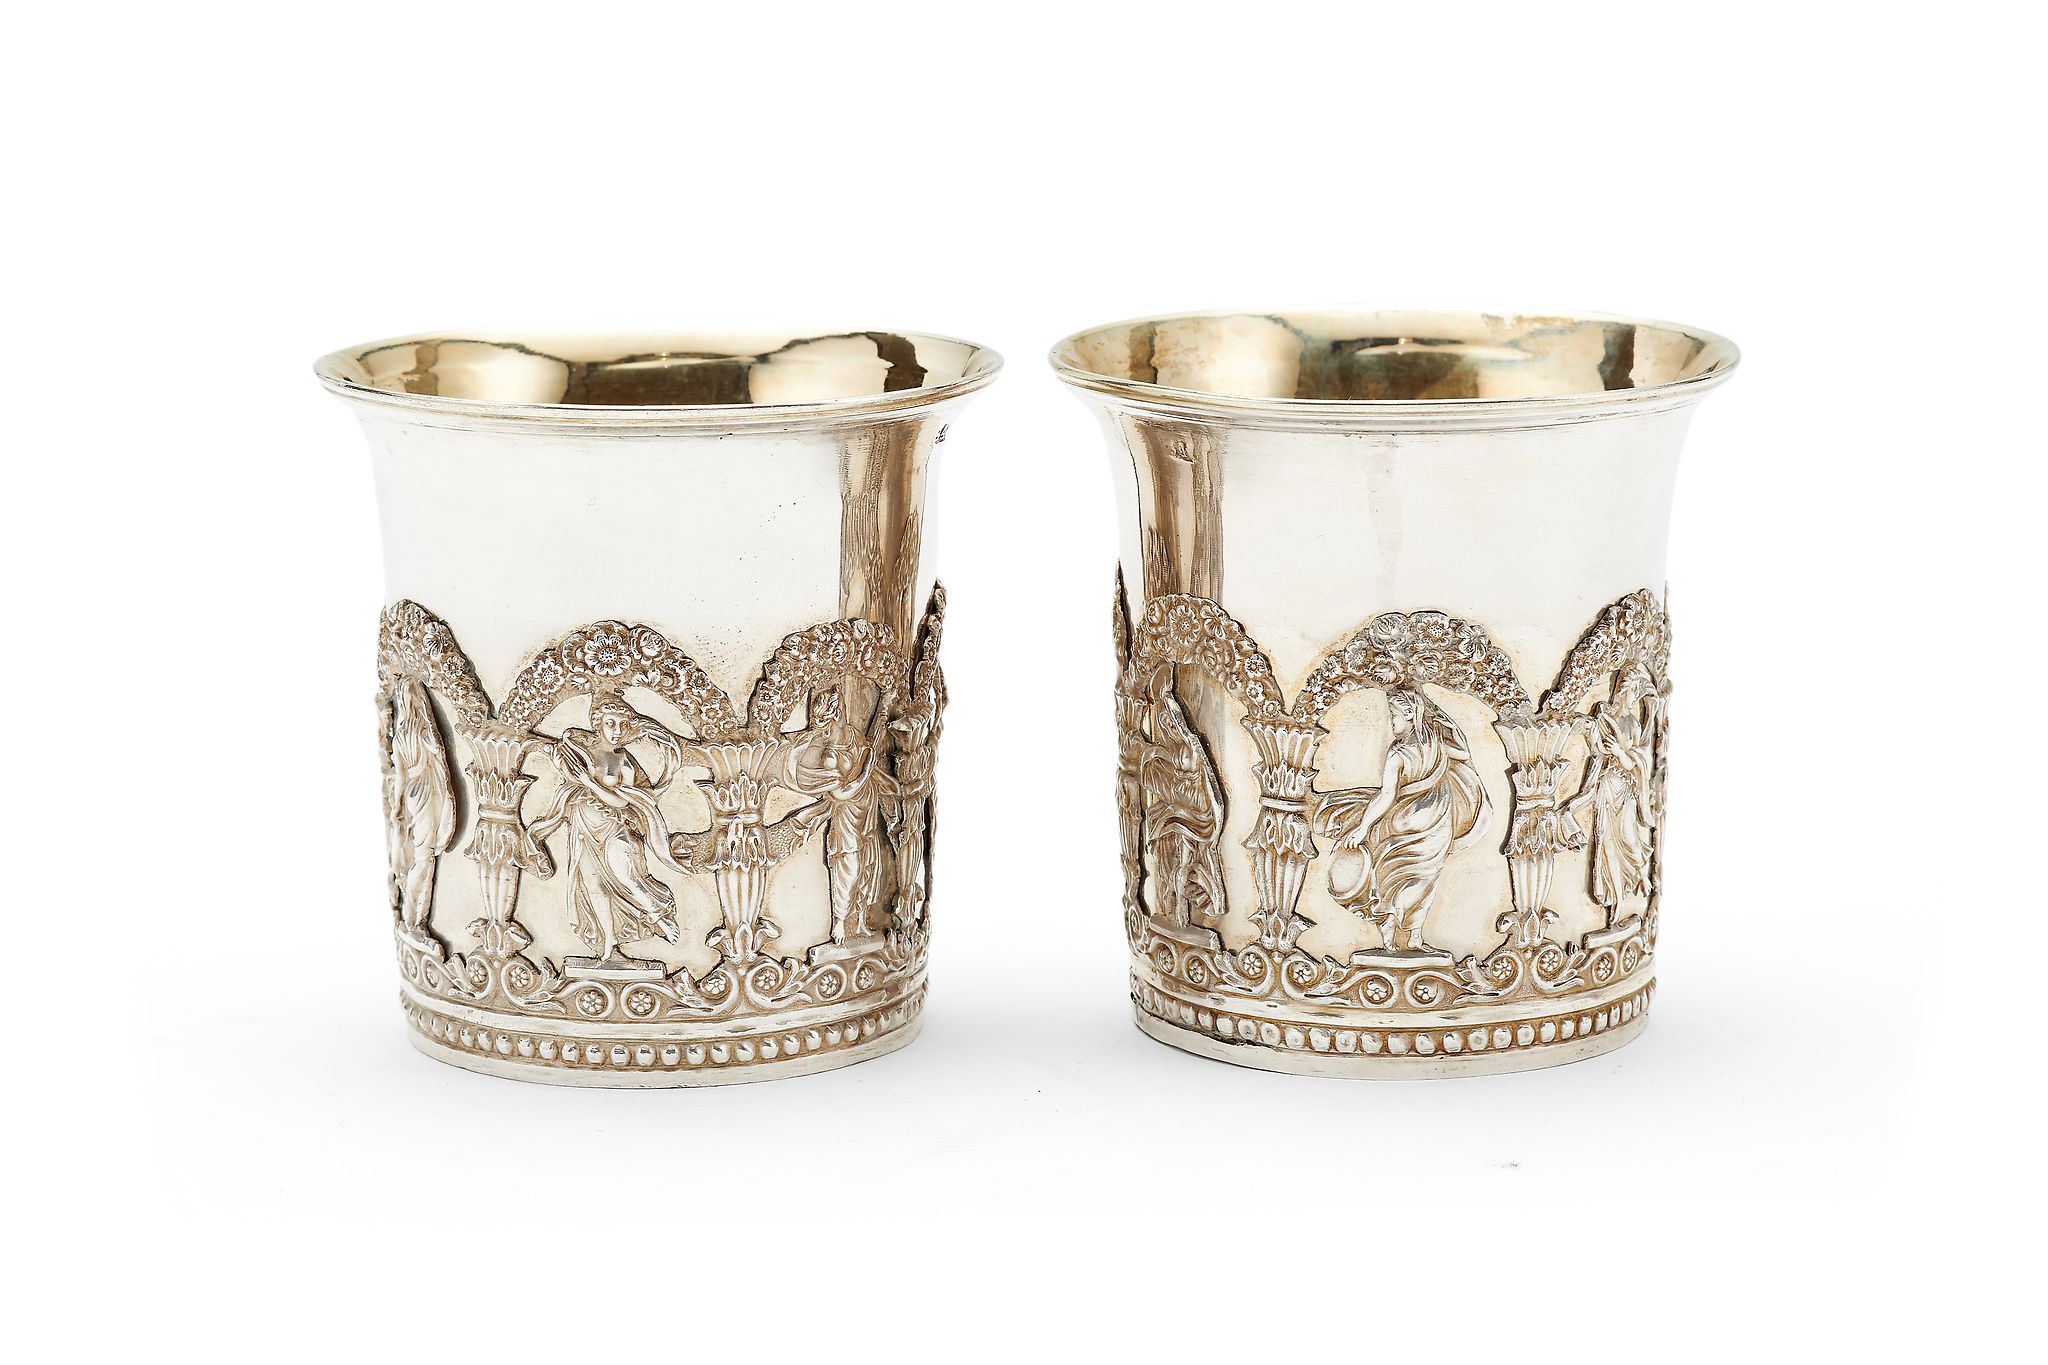 A pair of Russian silver beakers, maker's mark HJ (Latin, not traced), Moscow 1839, assay master